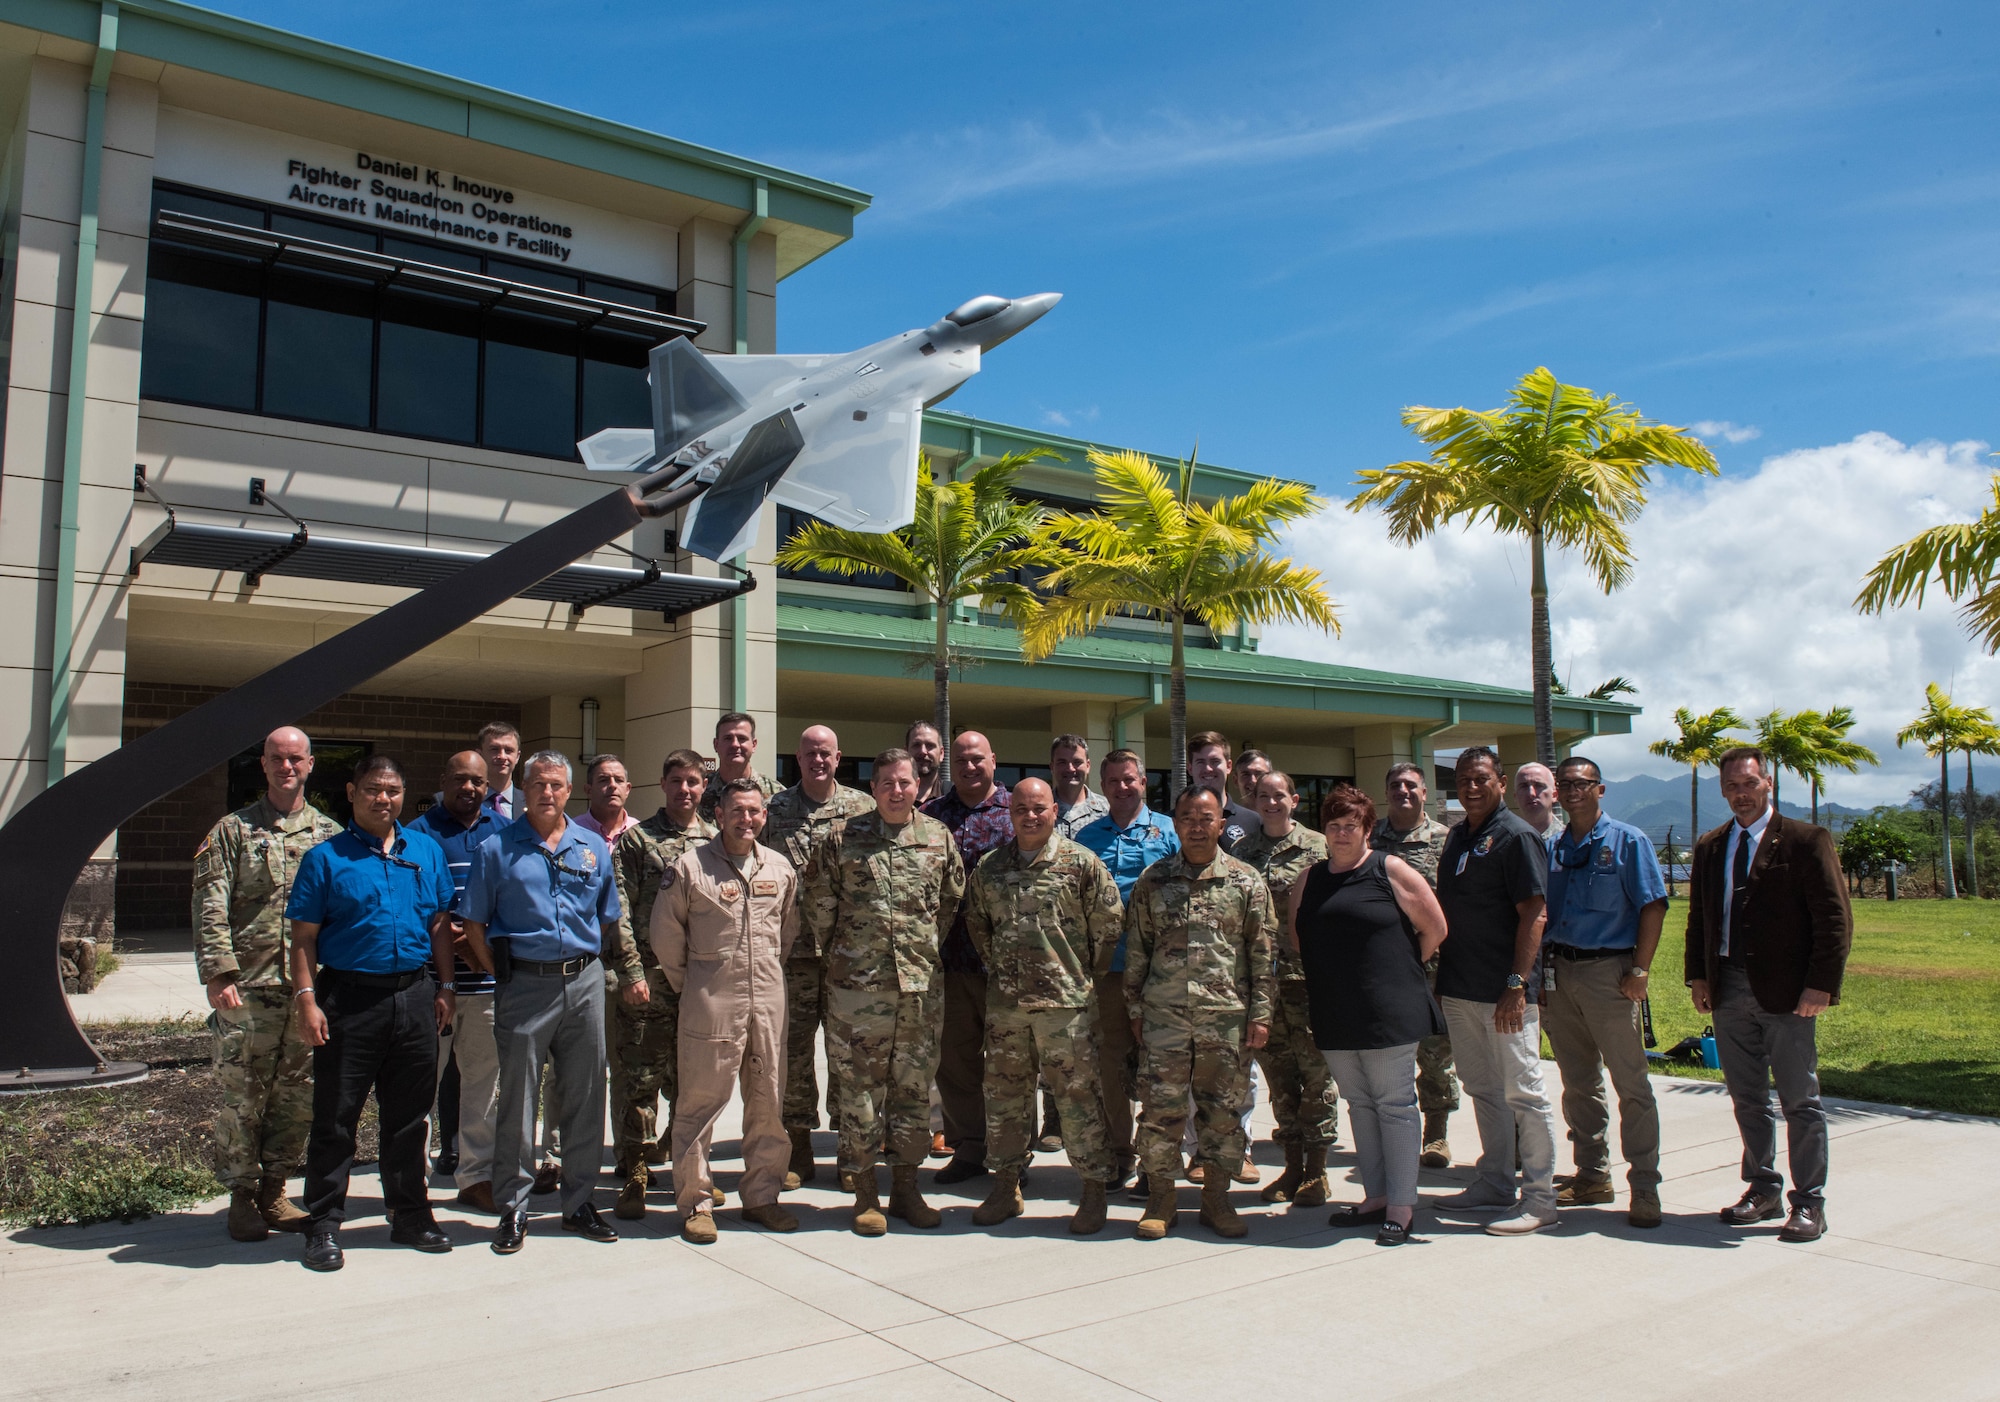 Participants of the Integrated Air and Missile Defense Center summit pose in front of the Hawaii Air National Guard Headquarters building, Joint Base Pearl Harbor-Hickam, Hawaii, Sept. 10, 2019. The purpose of the event – in its fifth iteration – is to provide a forum to exchange information, share lessons learned and best practices across the three Integrated Air and Missile Defense Centers. During the three-day conference, 30 participants received briefings on regional and global threats, emerging U.S. integrated air and missile defense capabilities, and were updated by the different Integrated Air and Missile Defense Centers around the globe. (U.S. Air Force photo by Staff Sgt. Hailey Haux)